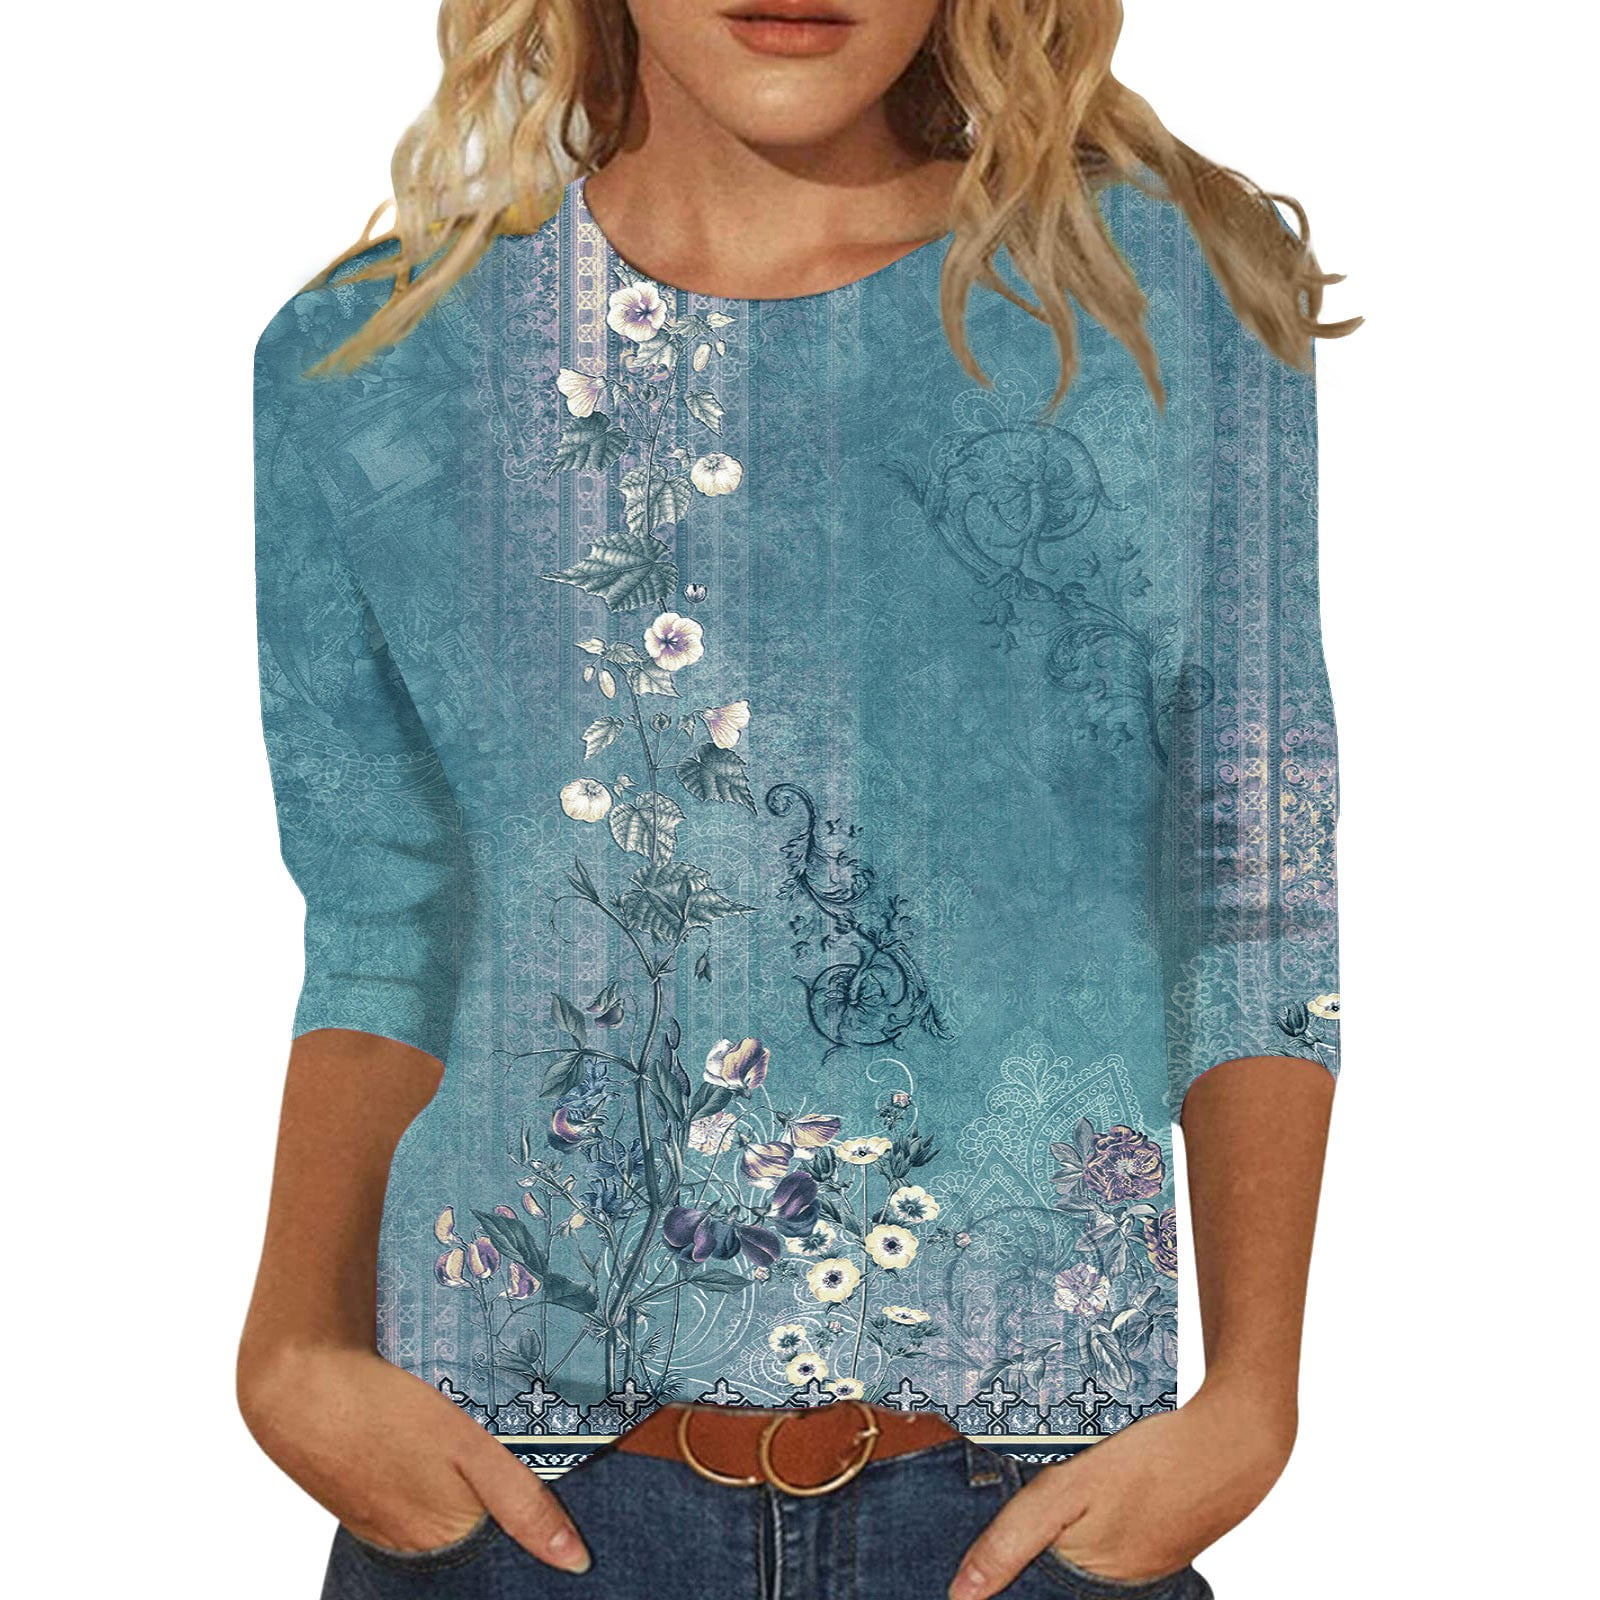 RPVATI Womens 3/4 Sleeve Summer Tops Casual Floral Print T-Shirt for ...